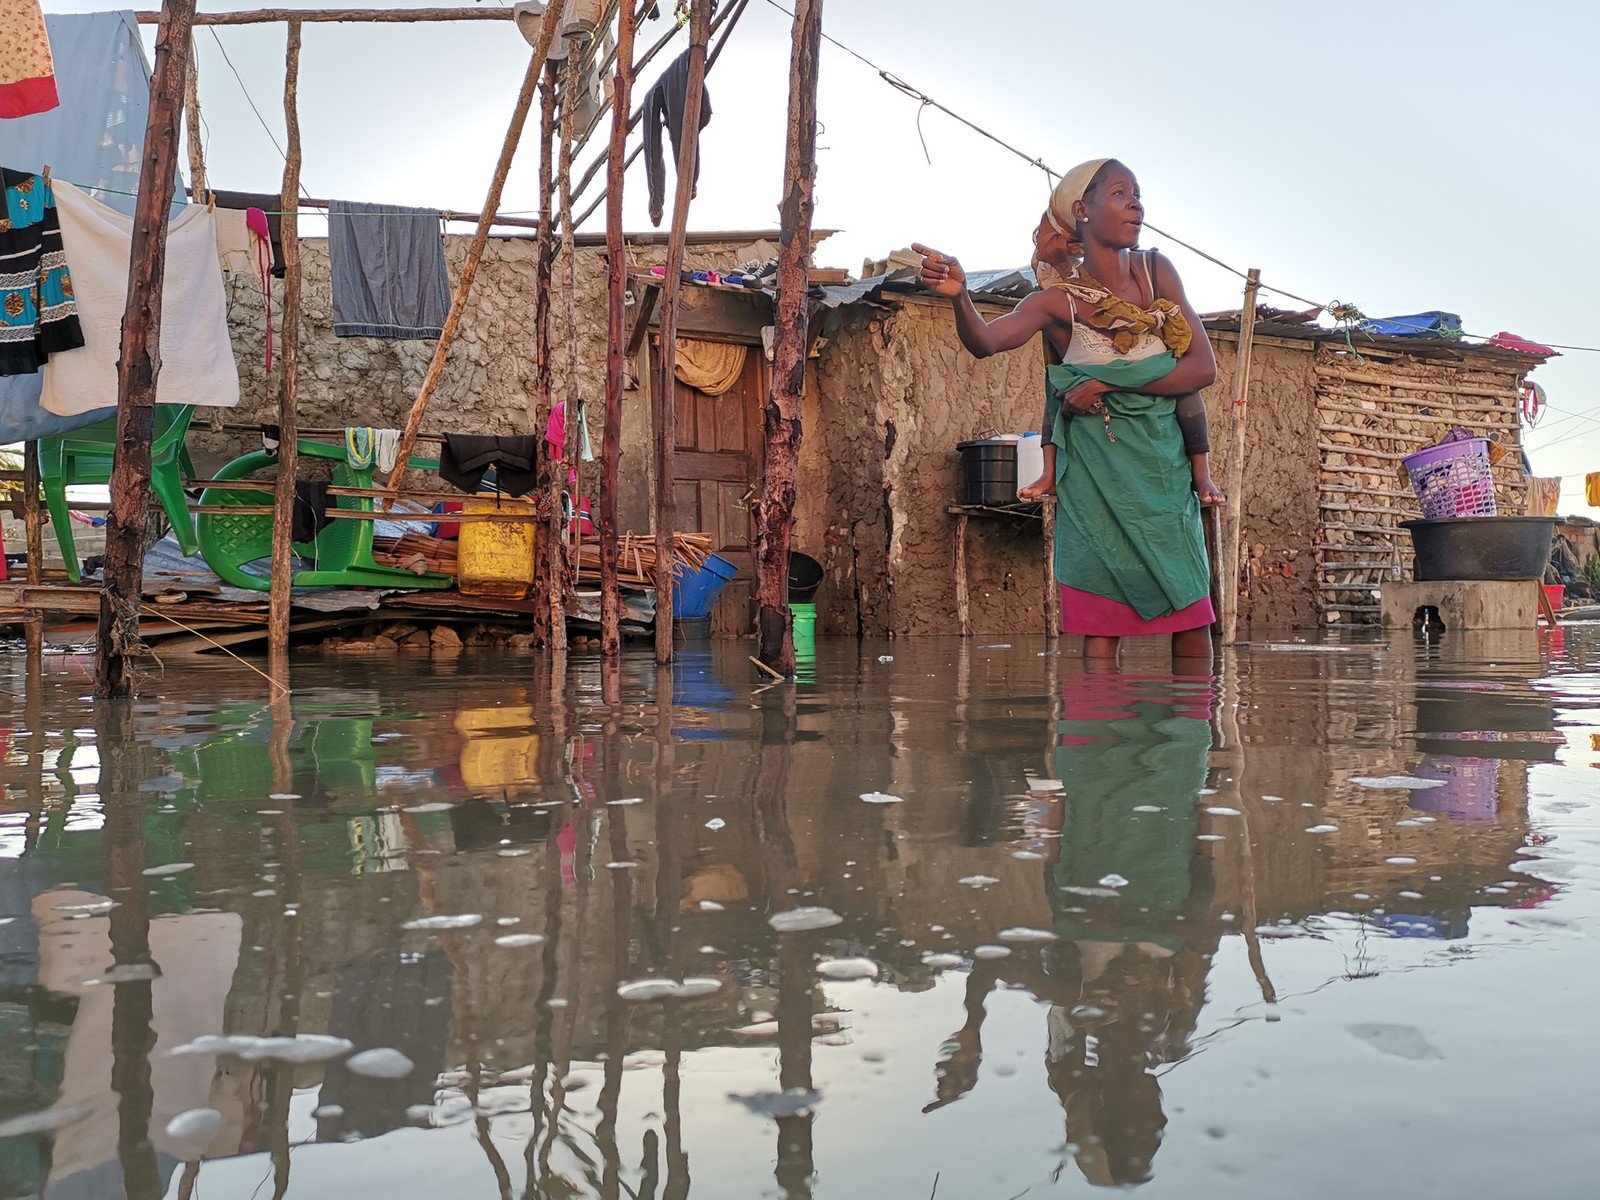 On 14 to 15 March 2019, Cyclone Idai slammed into Mozambique, Malawi and Zimbabwe, devastating the lives of about 2.6 million people across the three countries and claiming the lives of over 1,000. Barely six weeks on, Cyclone Kenneth tore through northern Mozambique. Repeated cyclones in Mozambique have caused US$3.2 billion worth of loss and damage – equivalent to 22 per cent of the country’s GDP or approximately 50 per cent of its national budget. (Photo: Sergio Zimba / Oxfam)